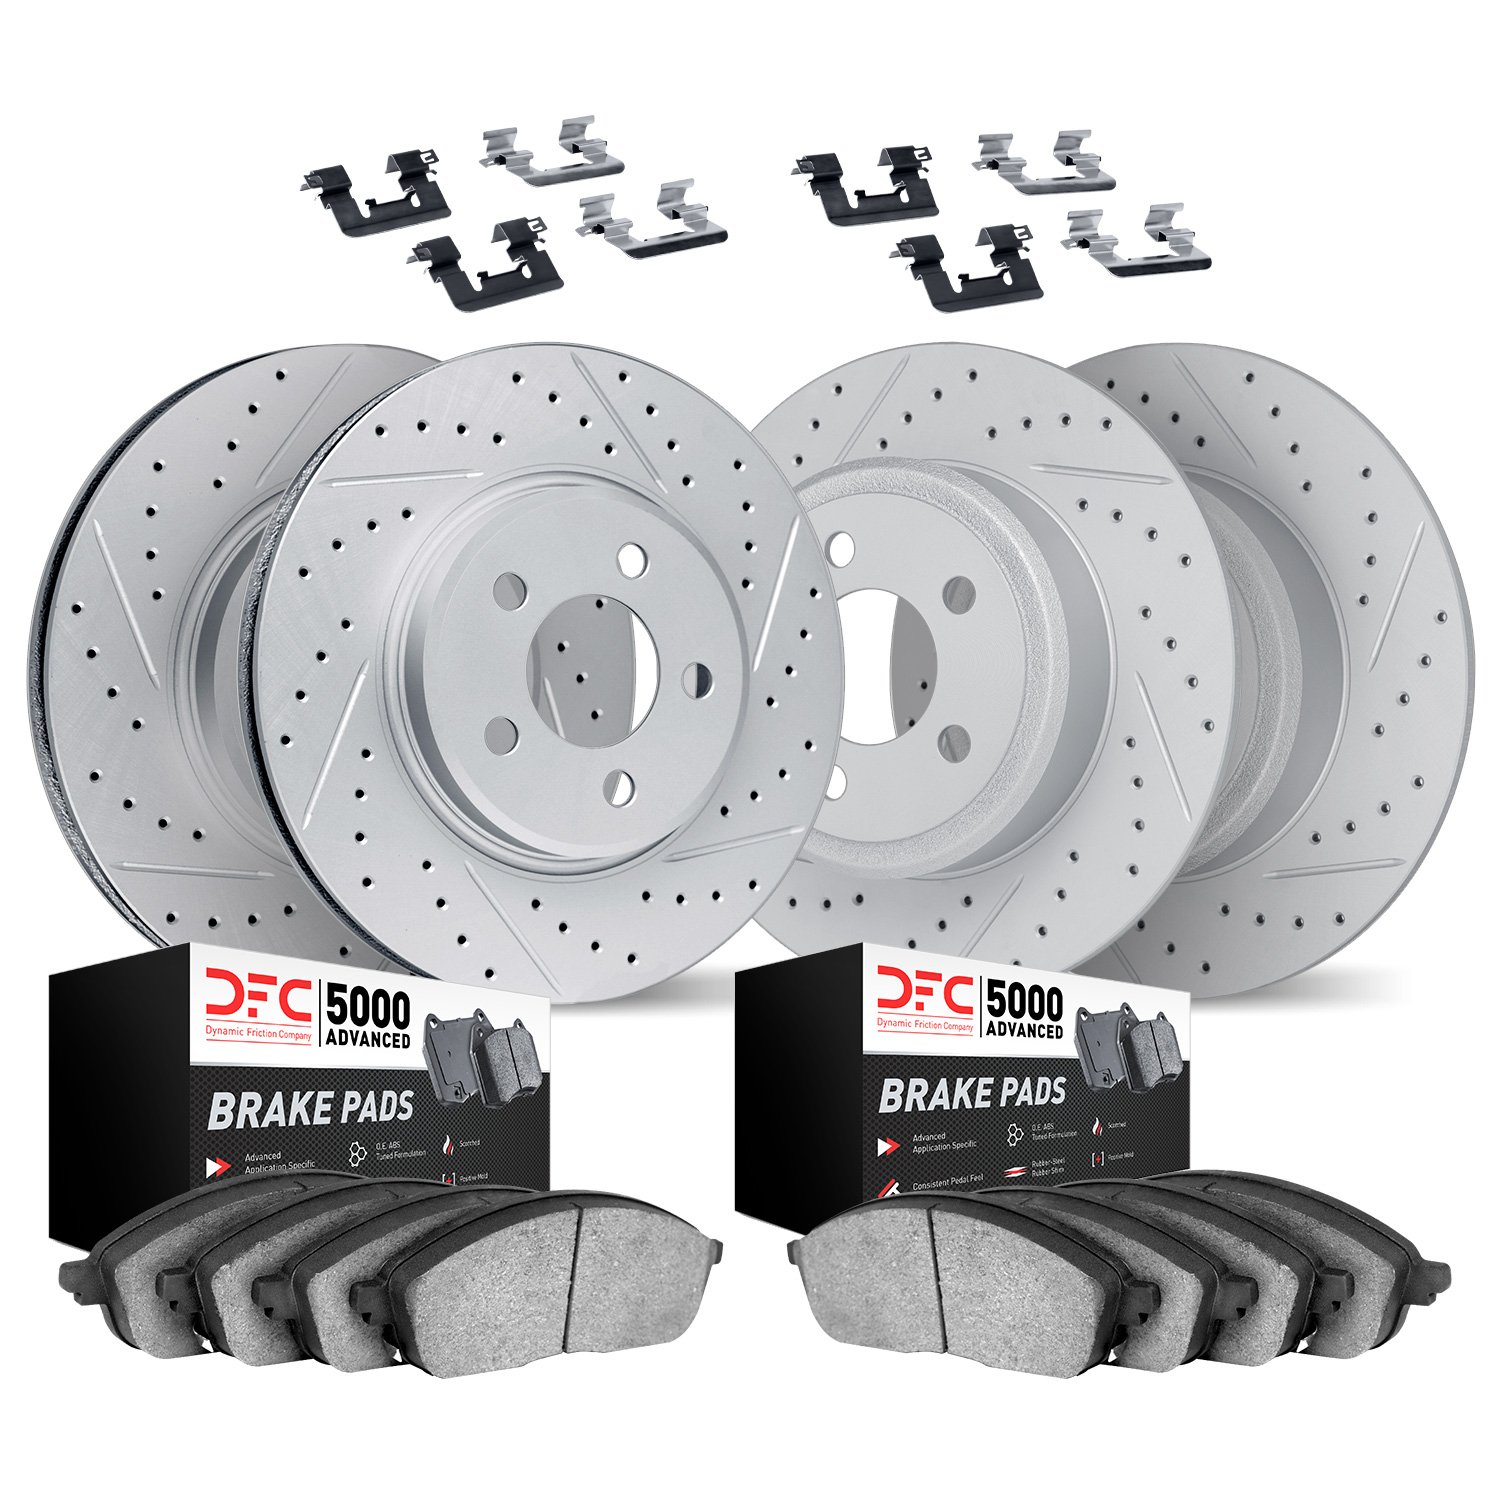 2514-45012 Geoperformance Drilled/Slotted Rotors w/5000 Advanced Brake Pads Kit & Hardware, 2006-2011 GM, Position: Front and Re